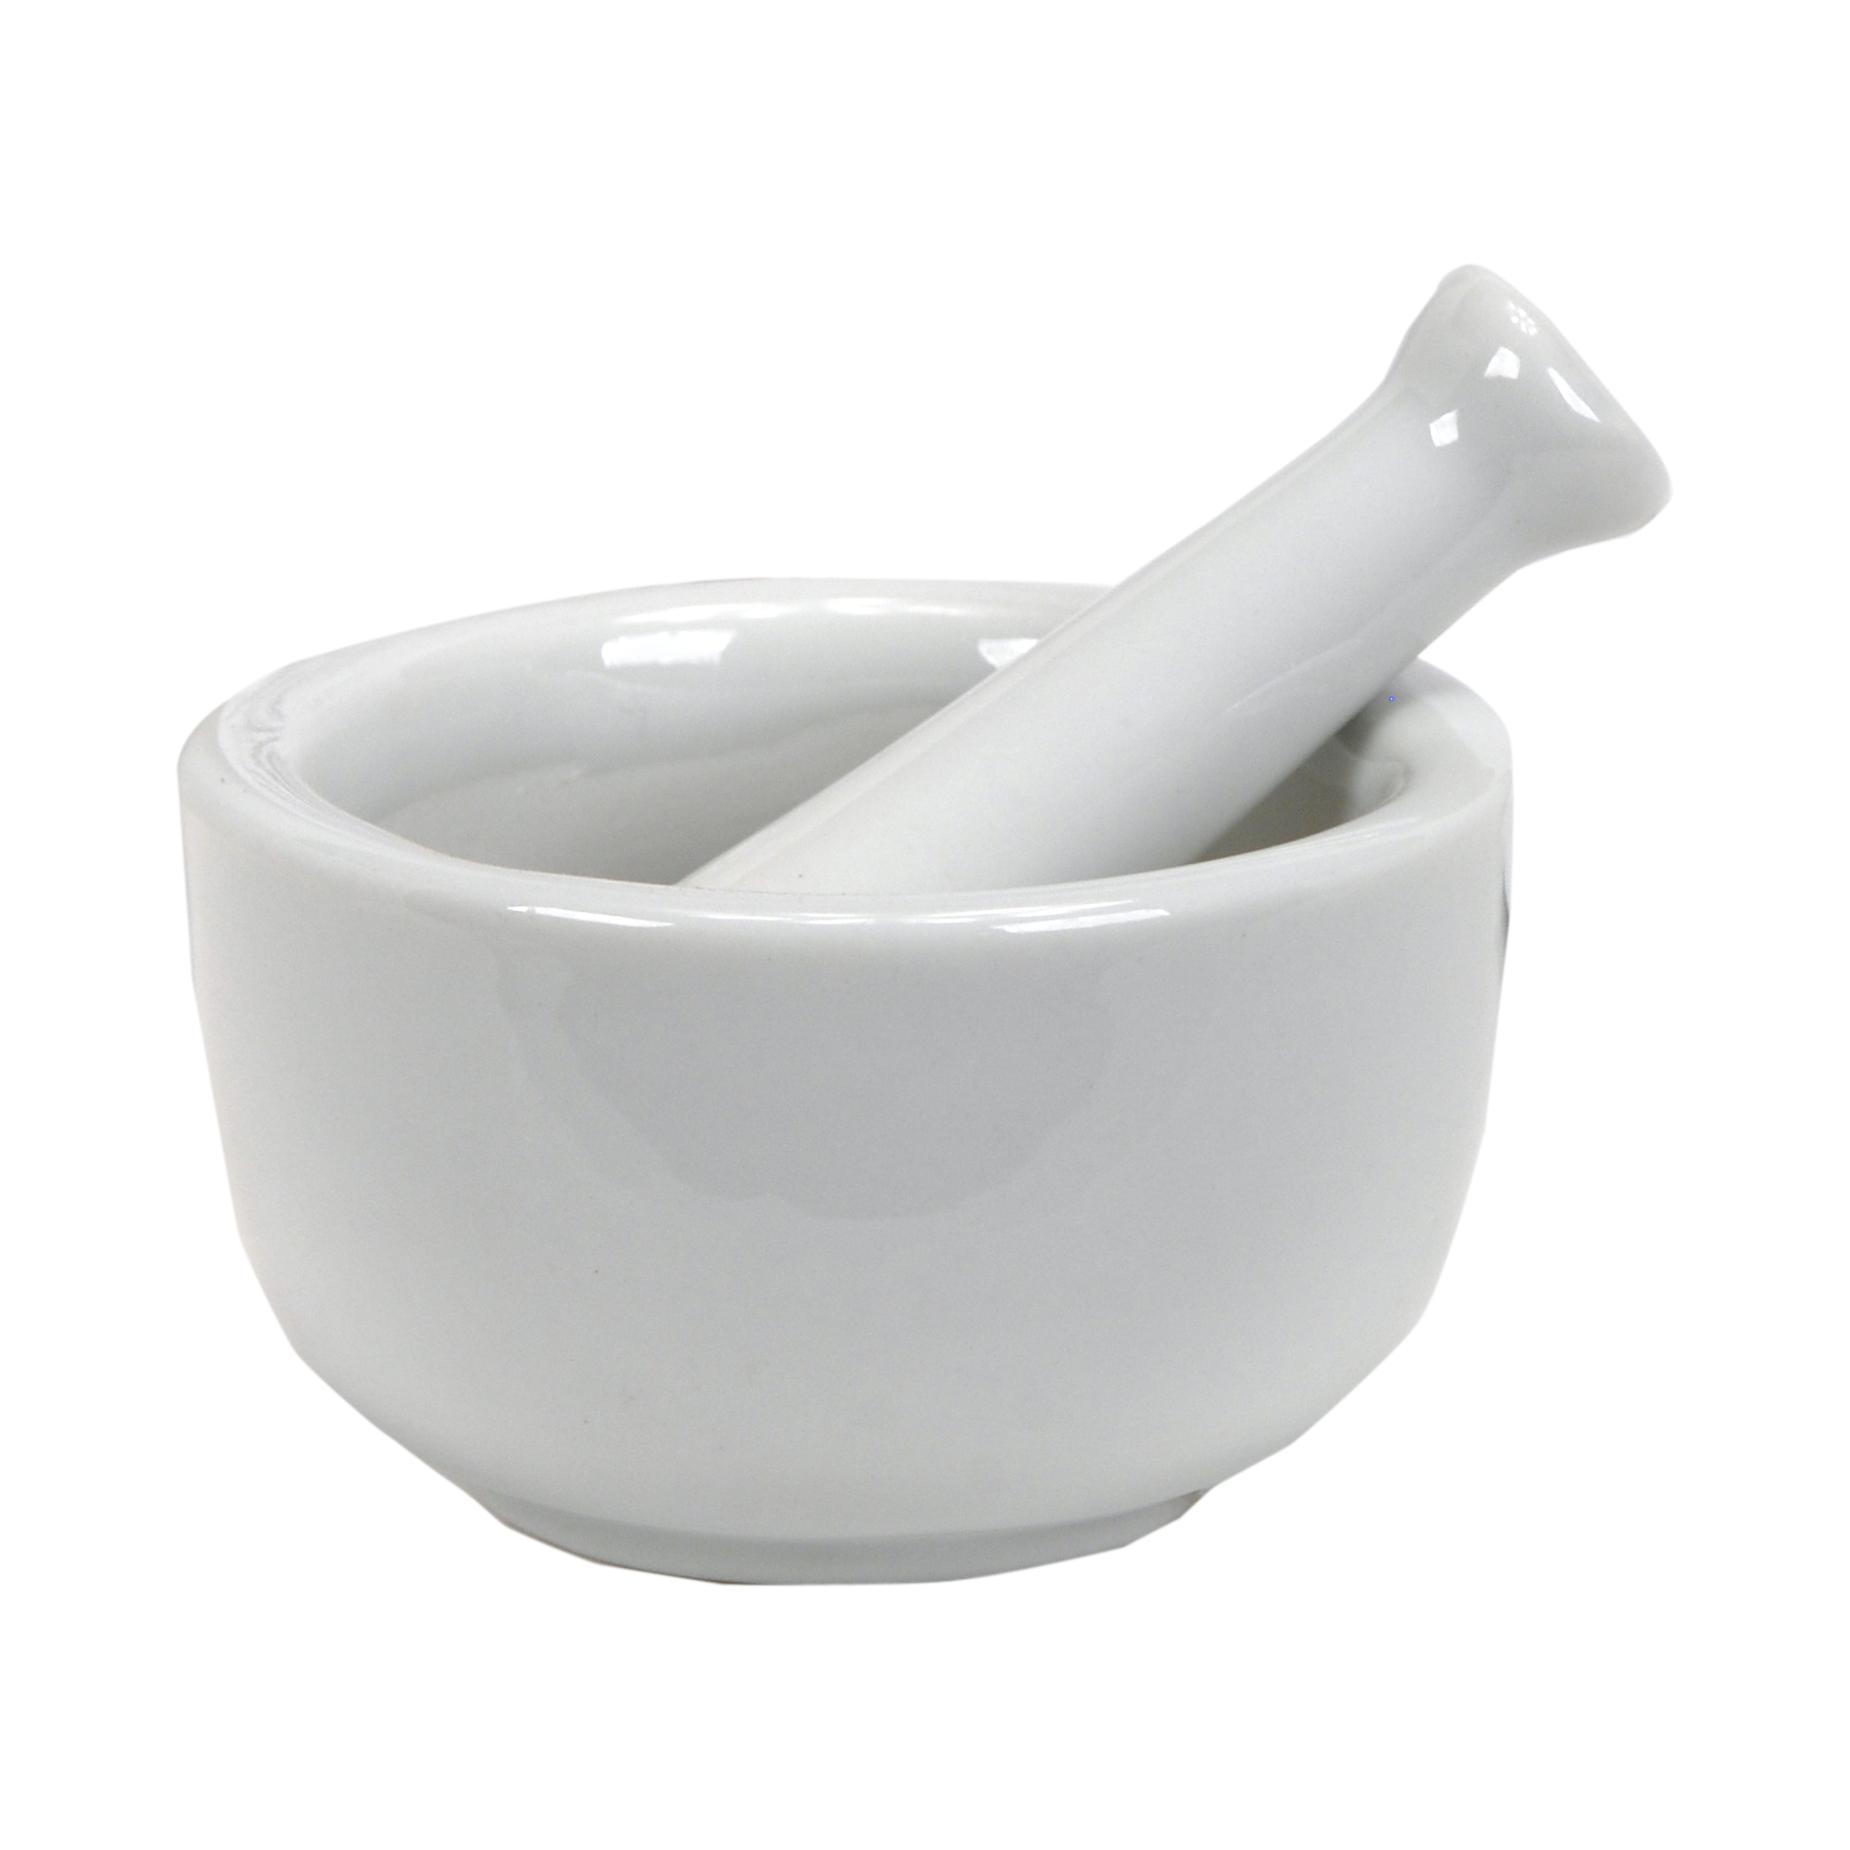 Mortar and Pestle | Mast General Store